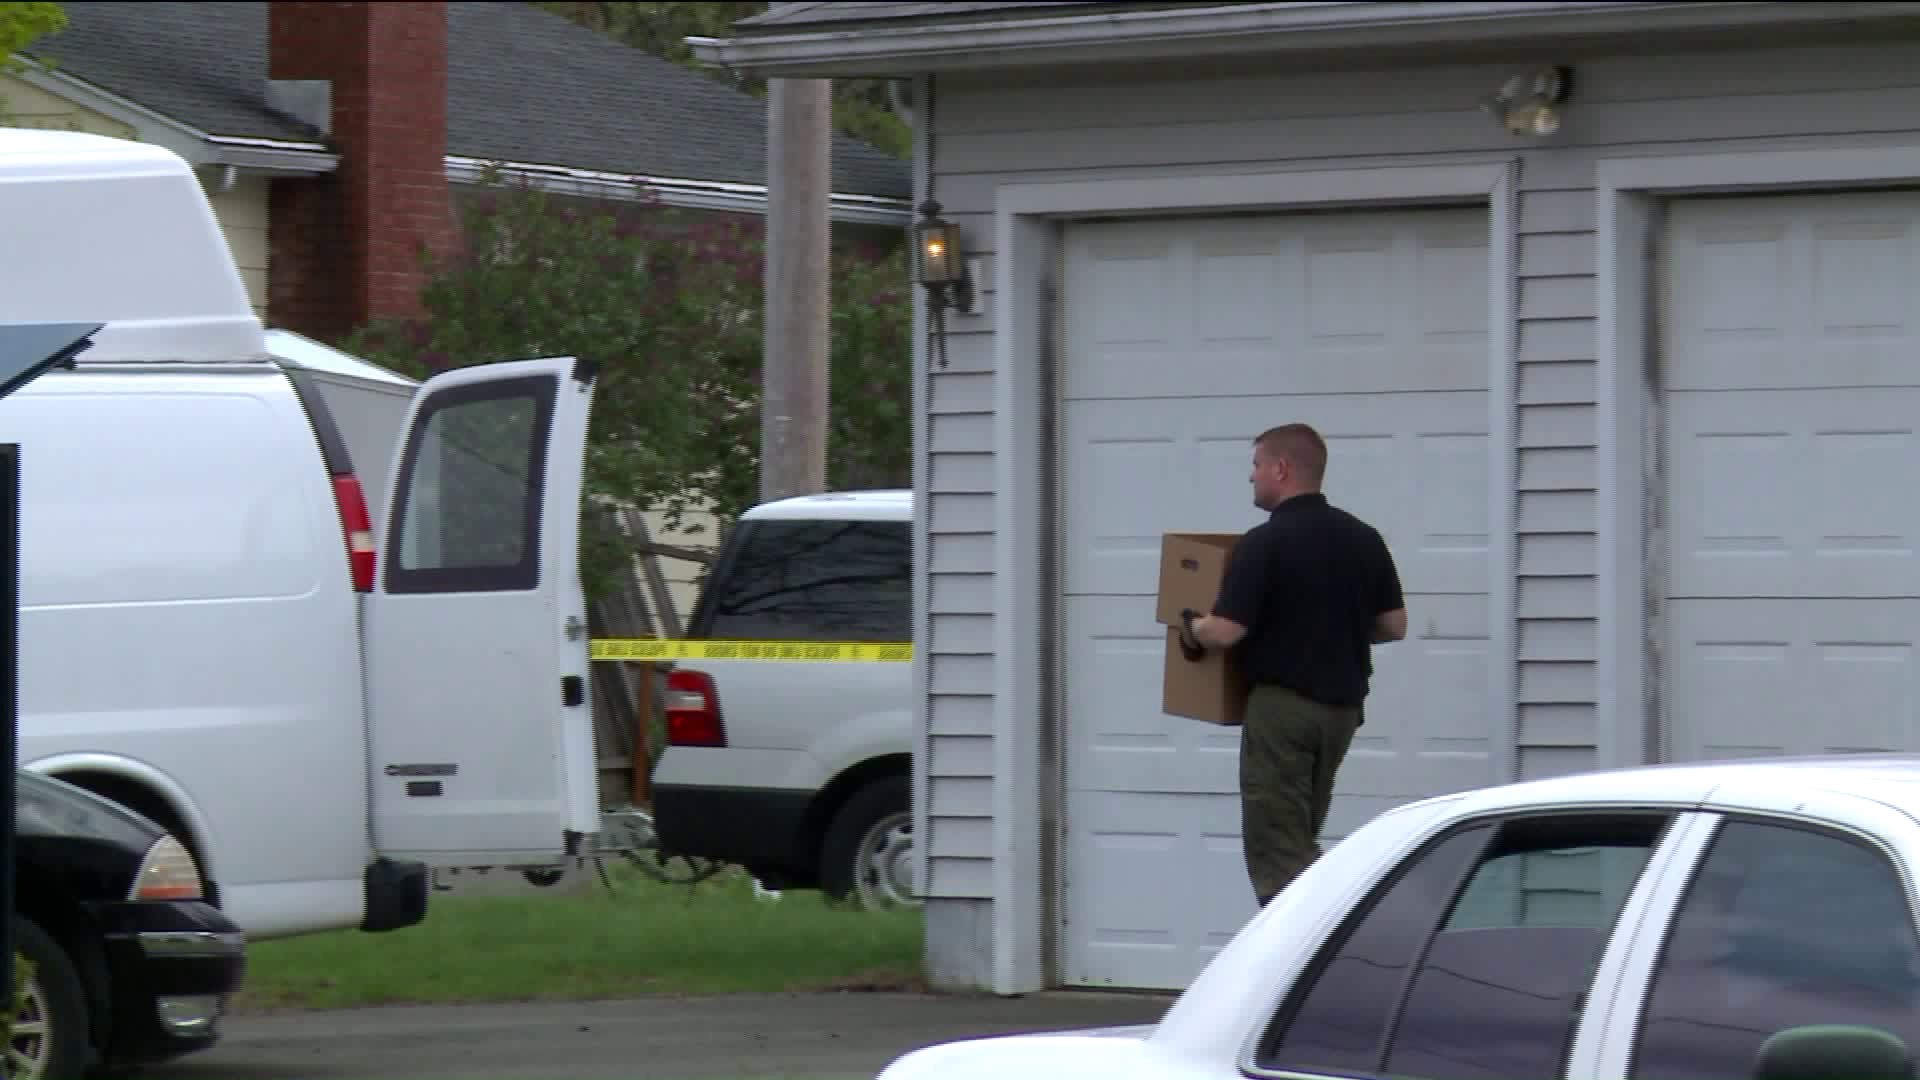 Fireworks, explosives found at New Haven home